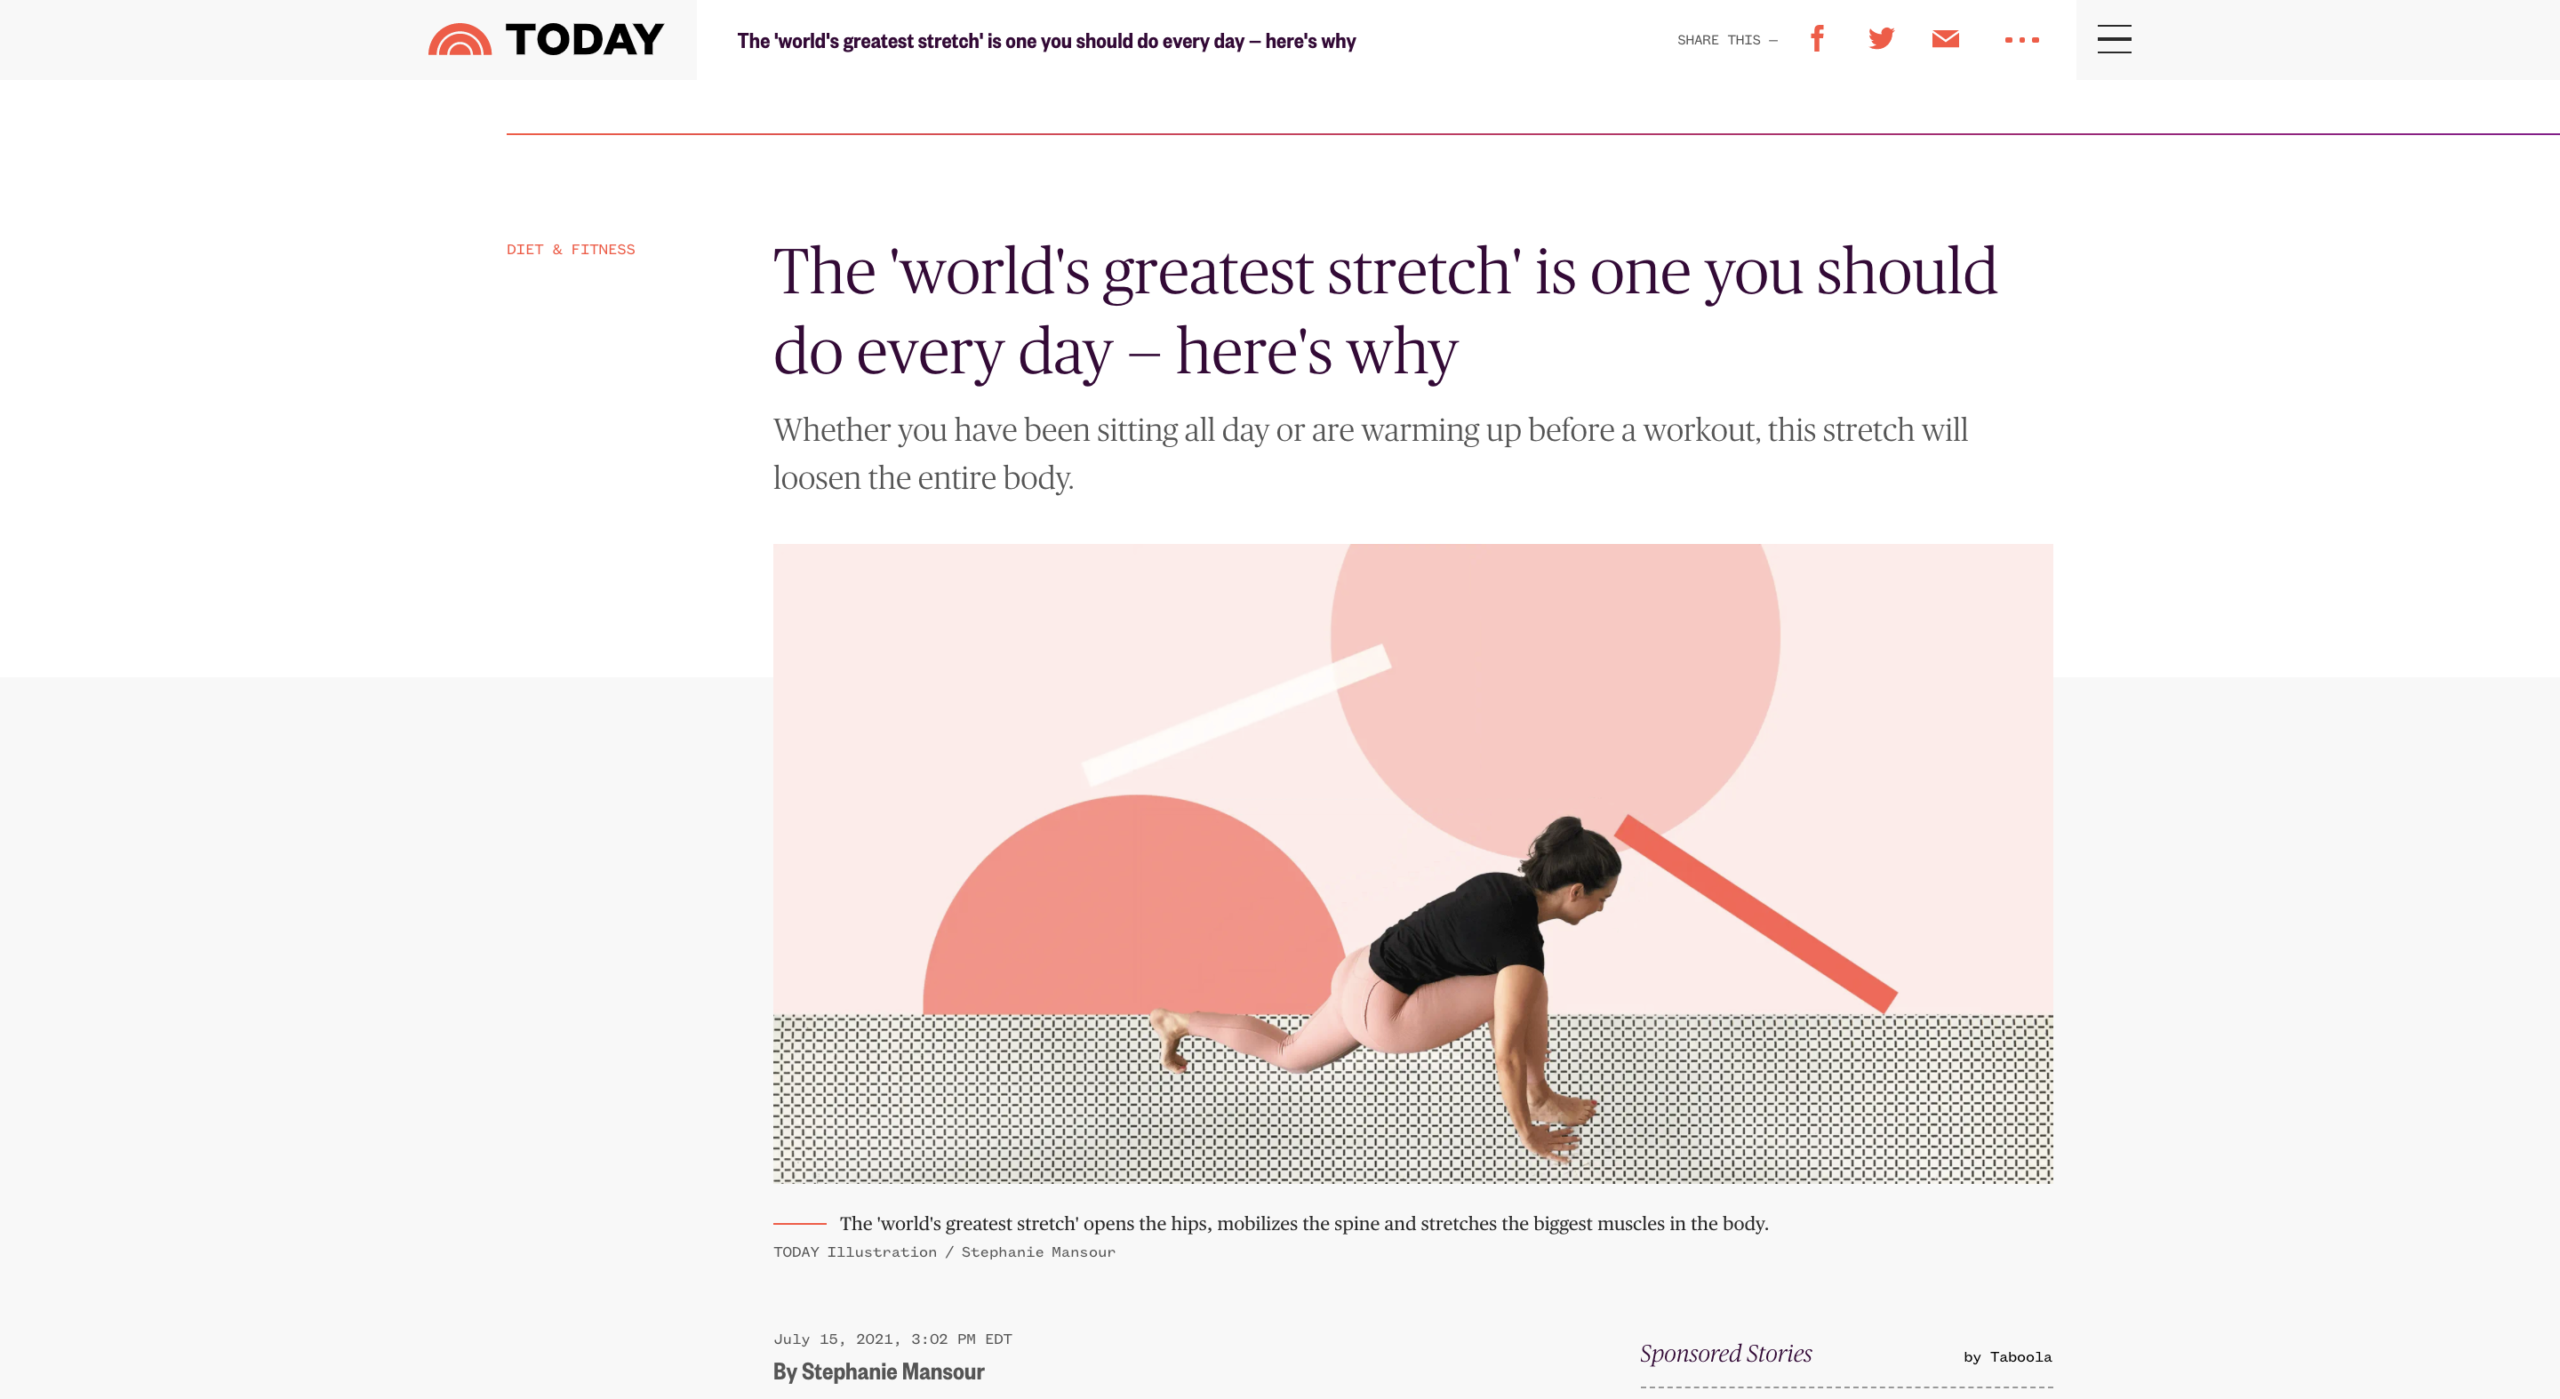 TODAY SHOW: How to perform the ‘world’s greatest stretch’